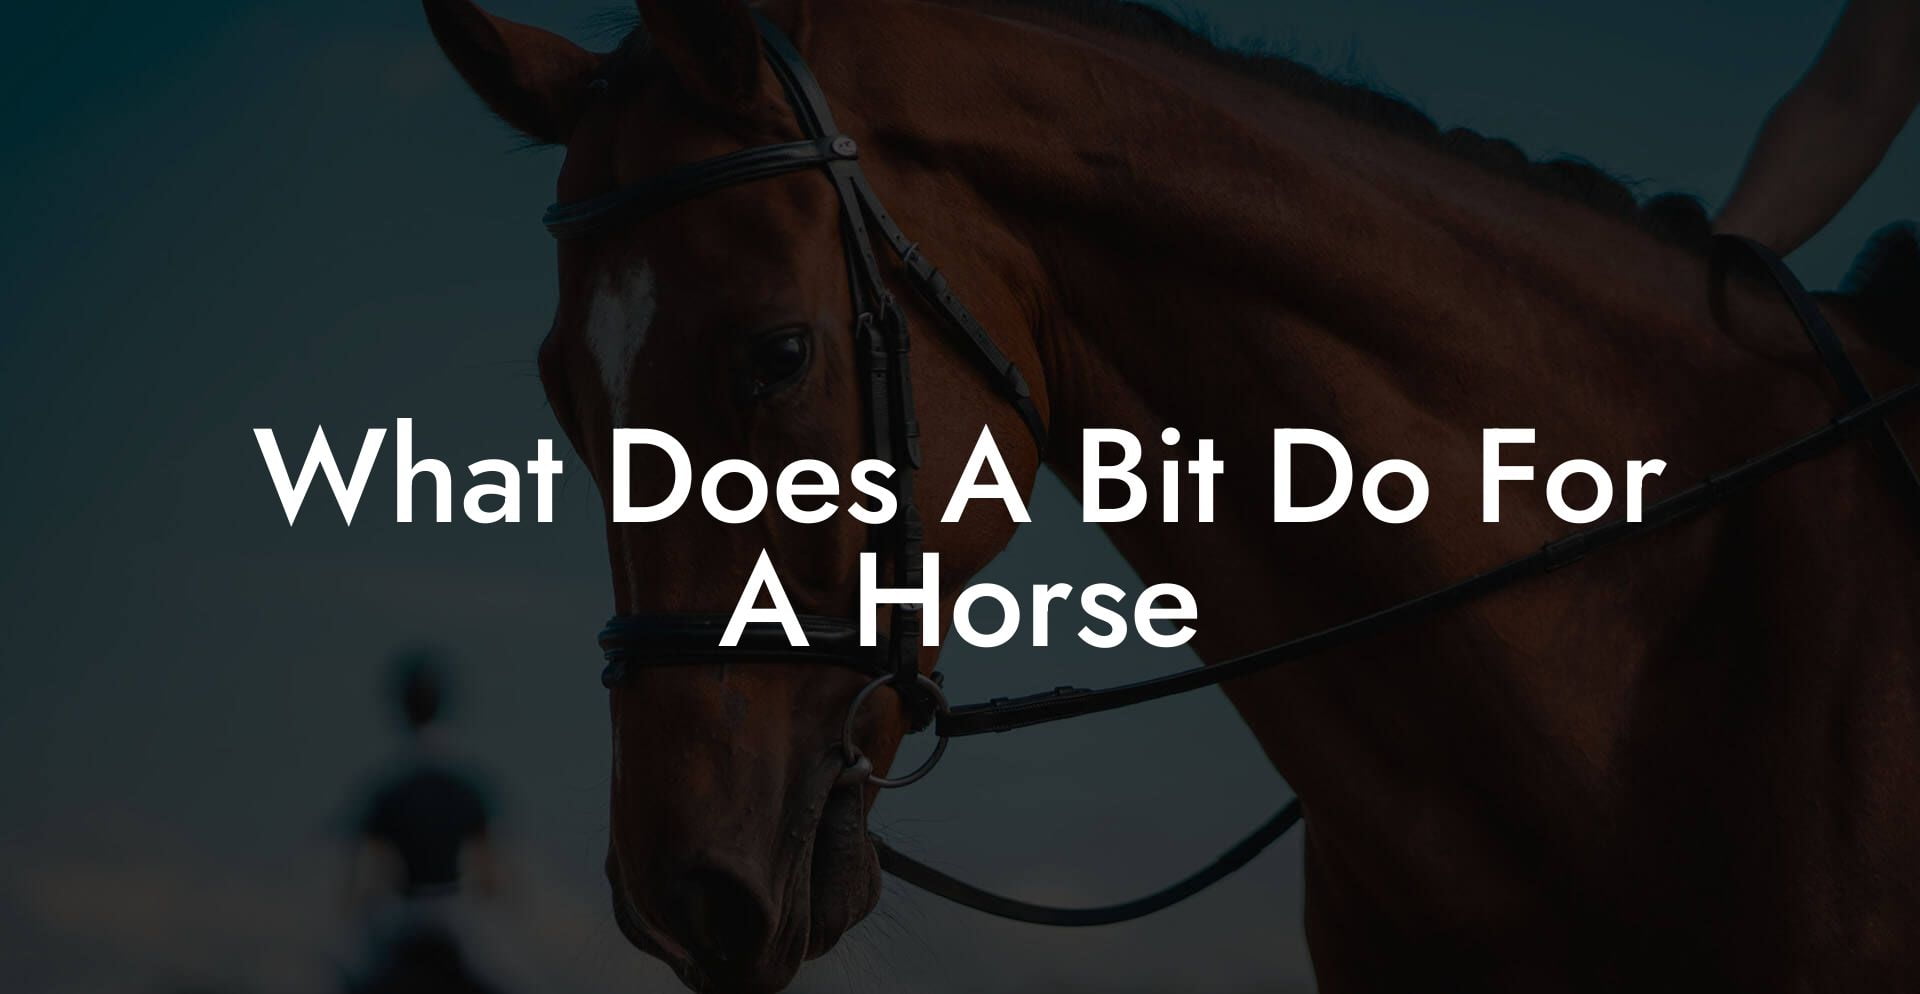 What Does A Bit Do For A Horse